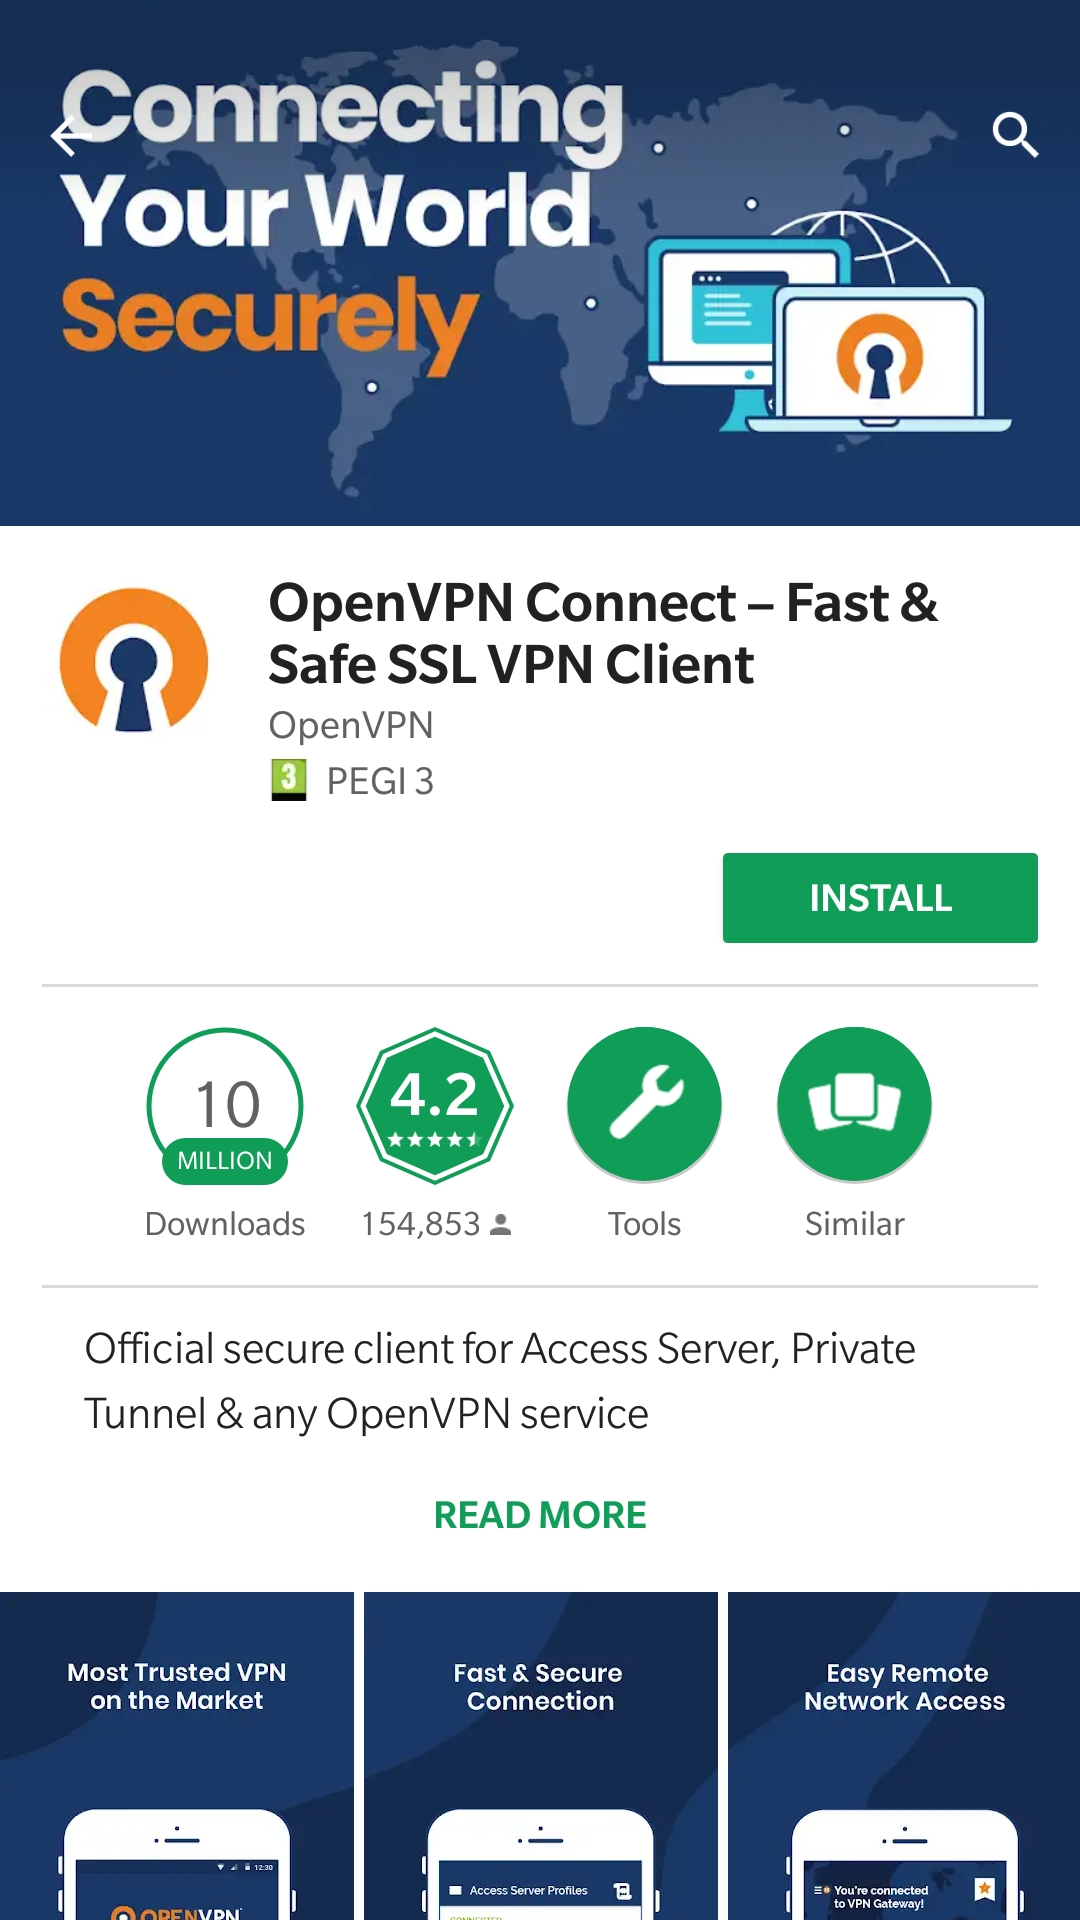 openvpn password and certificate authentication